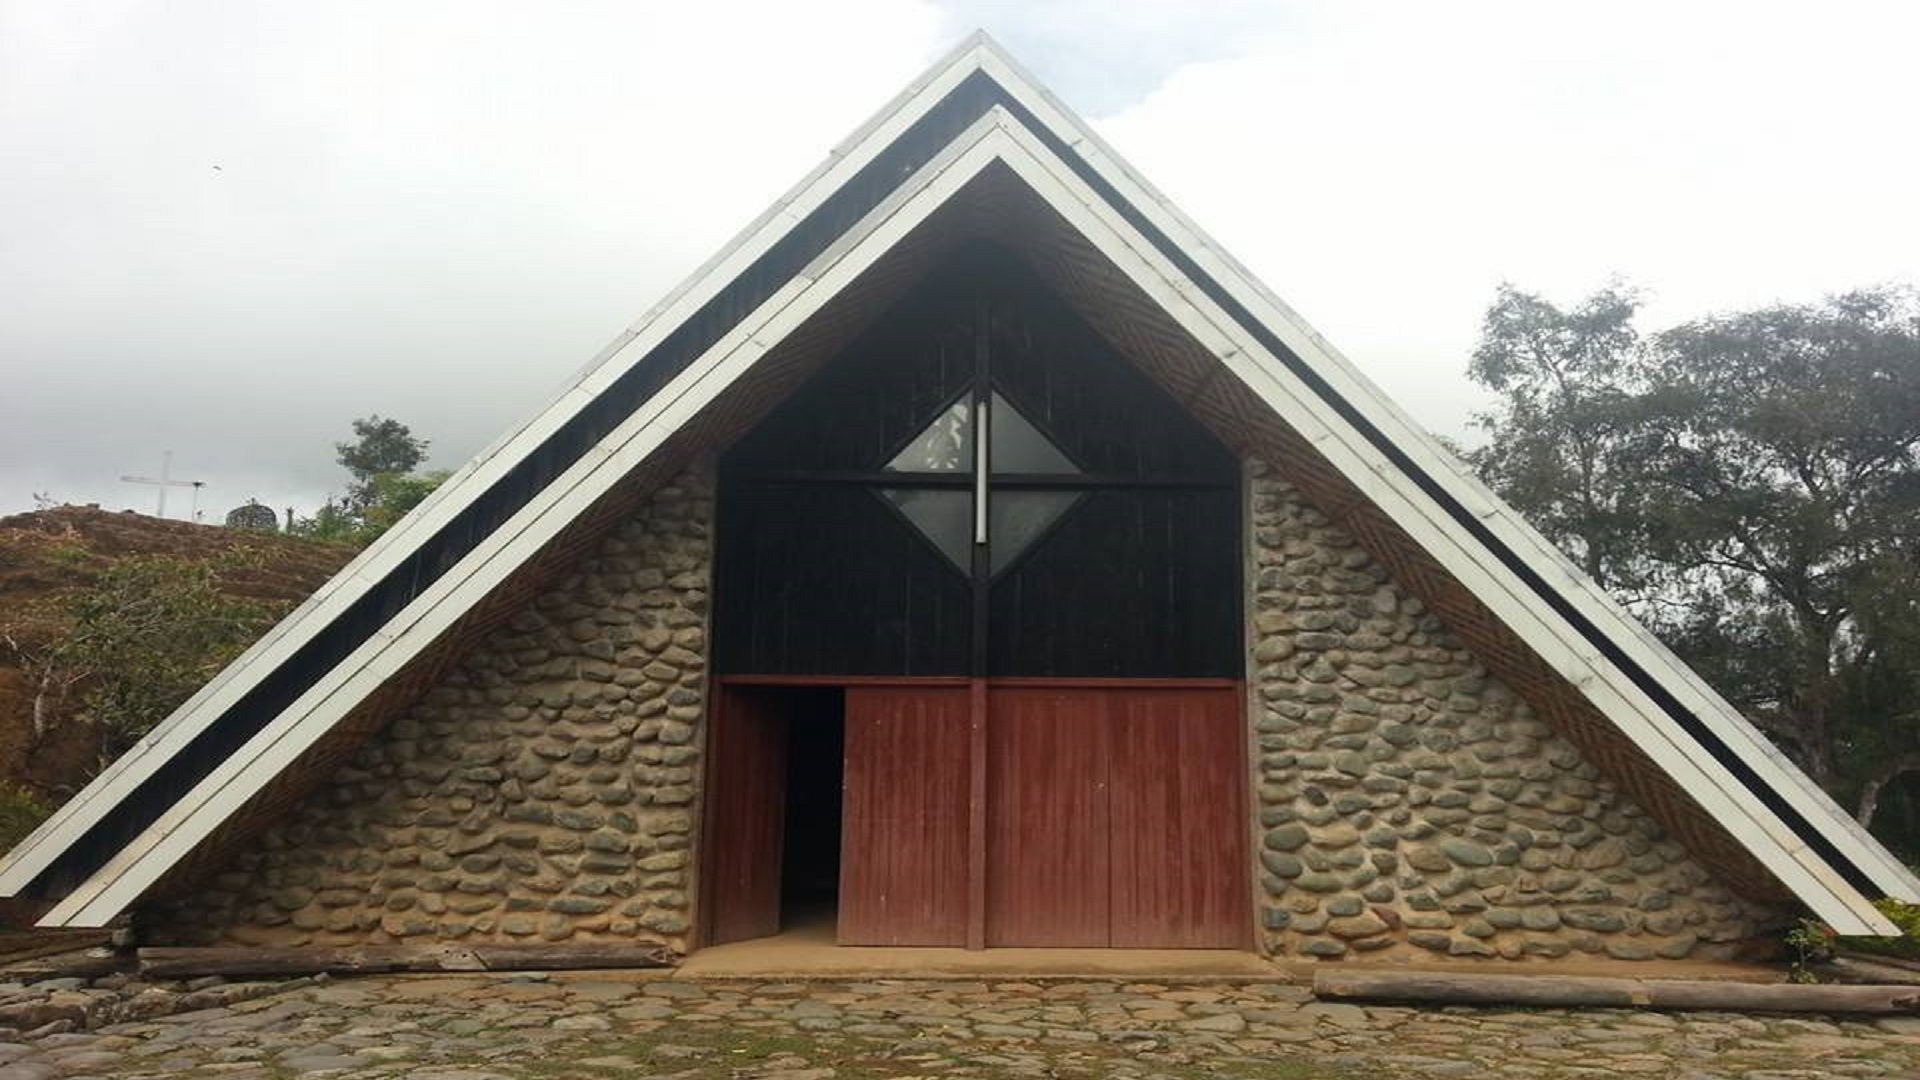 An old Catholic Church in the Remote Jiwaka Province. This church is in remote Jimi area in the new Jiwaka Province